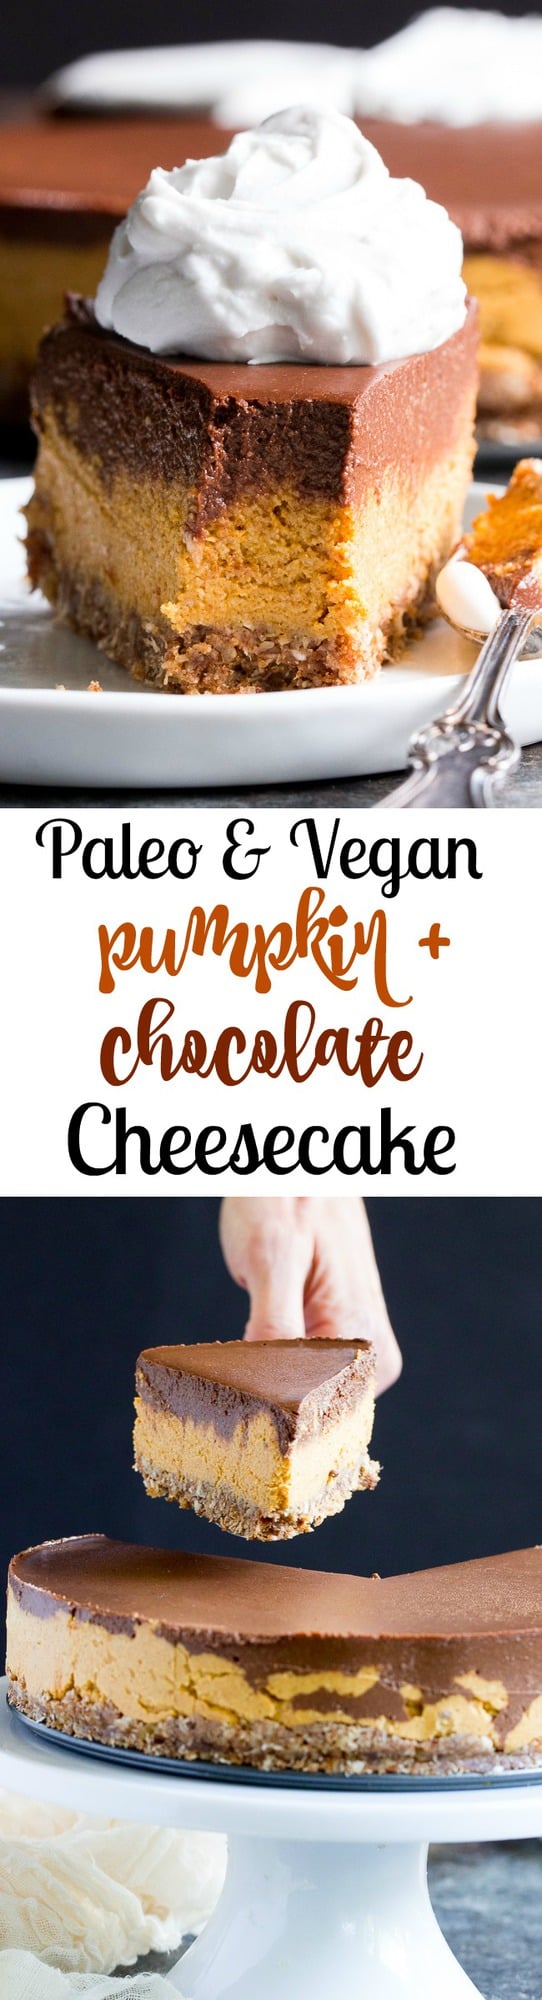 This no-bake chocolate pumpkin cashew cheesecake is a deliciously rich and creamy dessert for the holidays or any special occasion!  Two decadent vegan cheesecake layers are poured over a pecan, coconut and date crust and chilled to silky smooth perfection.  Paleo, vegan, dairy-free, gluten-free and family approved!